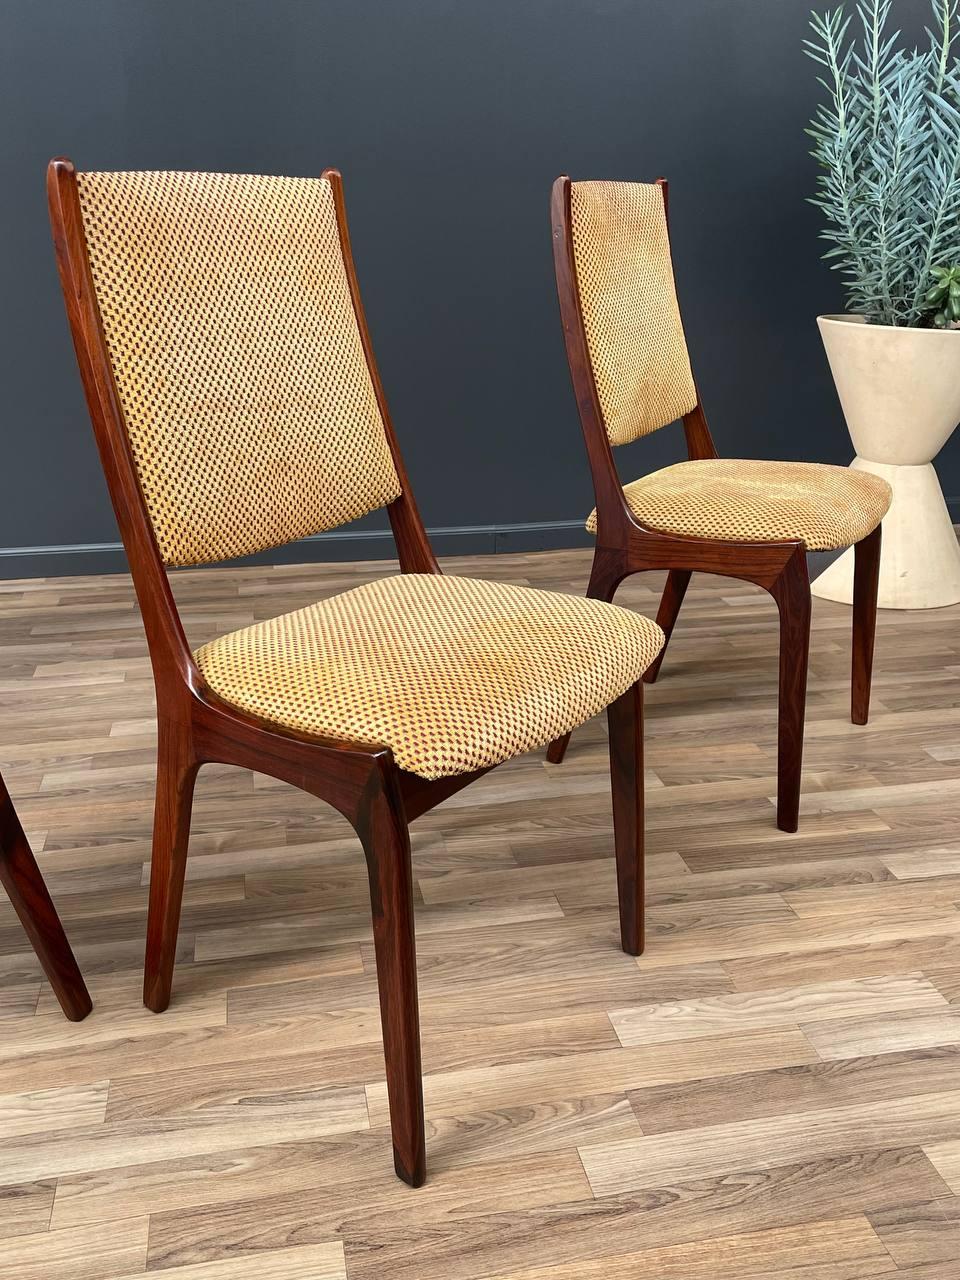 Set of 6 Danish Modern Rosewood Dining Chairs by Korup Stolefabrik In Good Condition For Sale In Los Angeles, CA